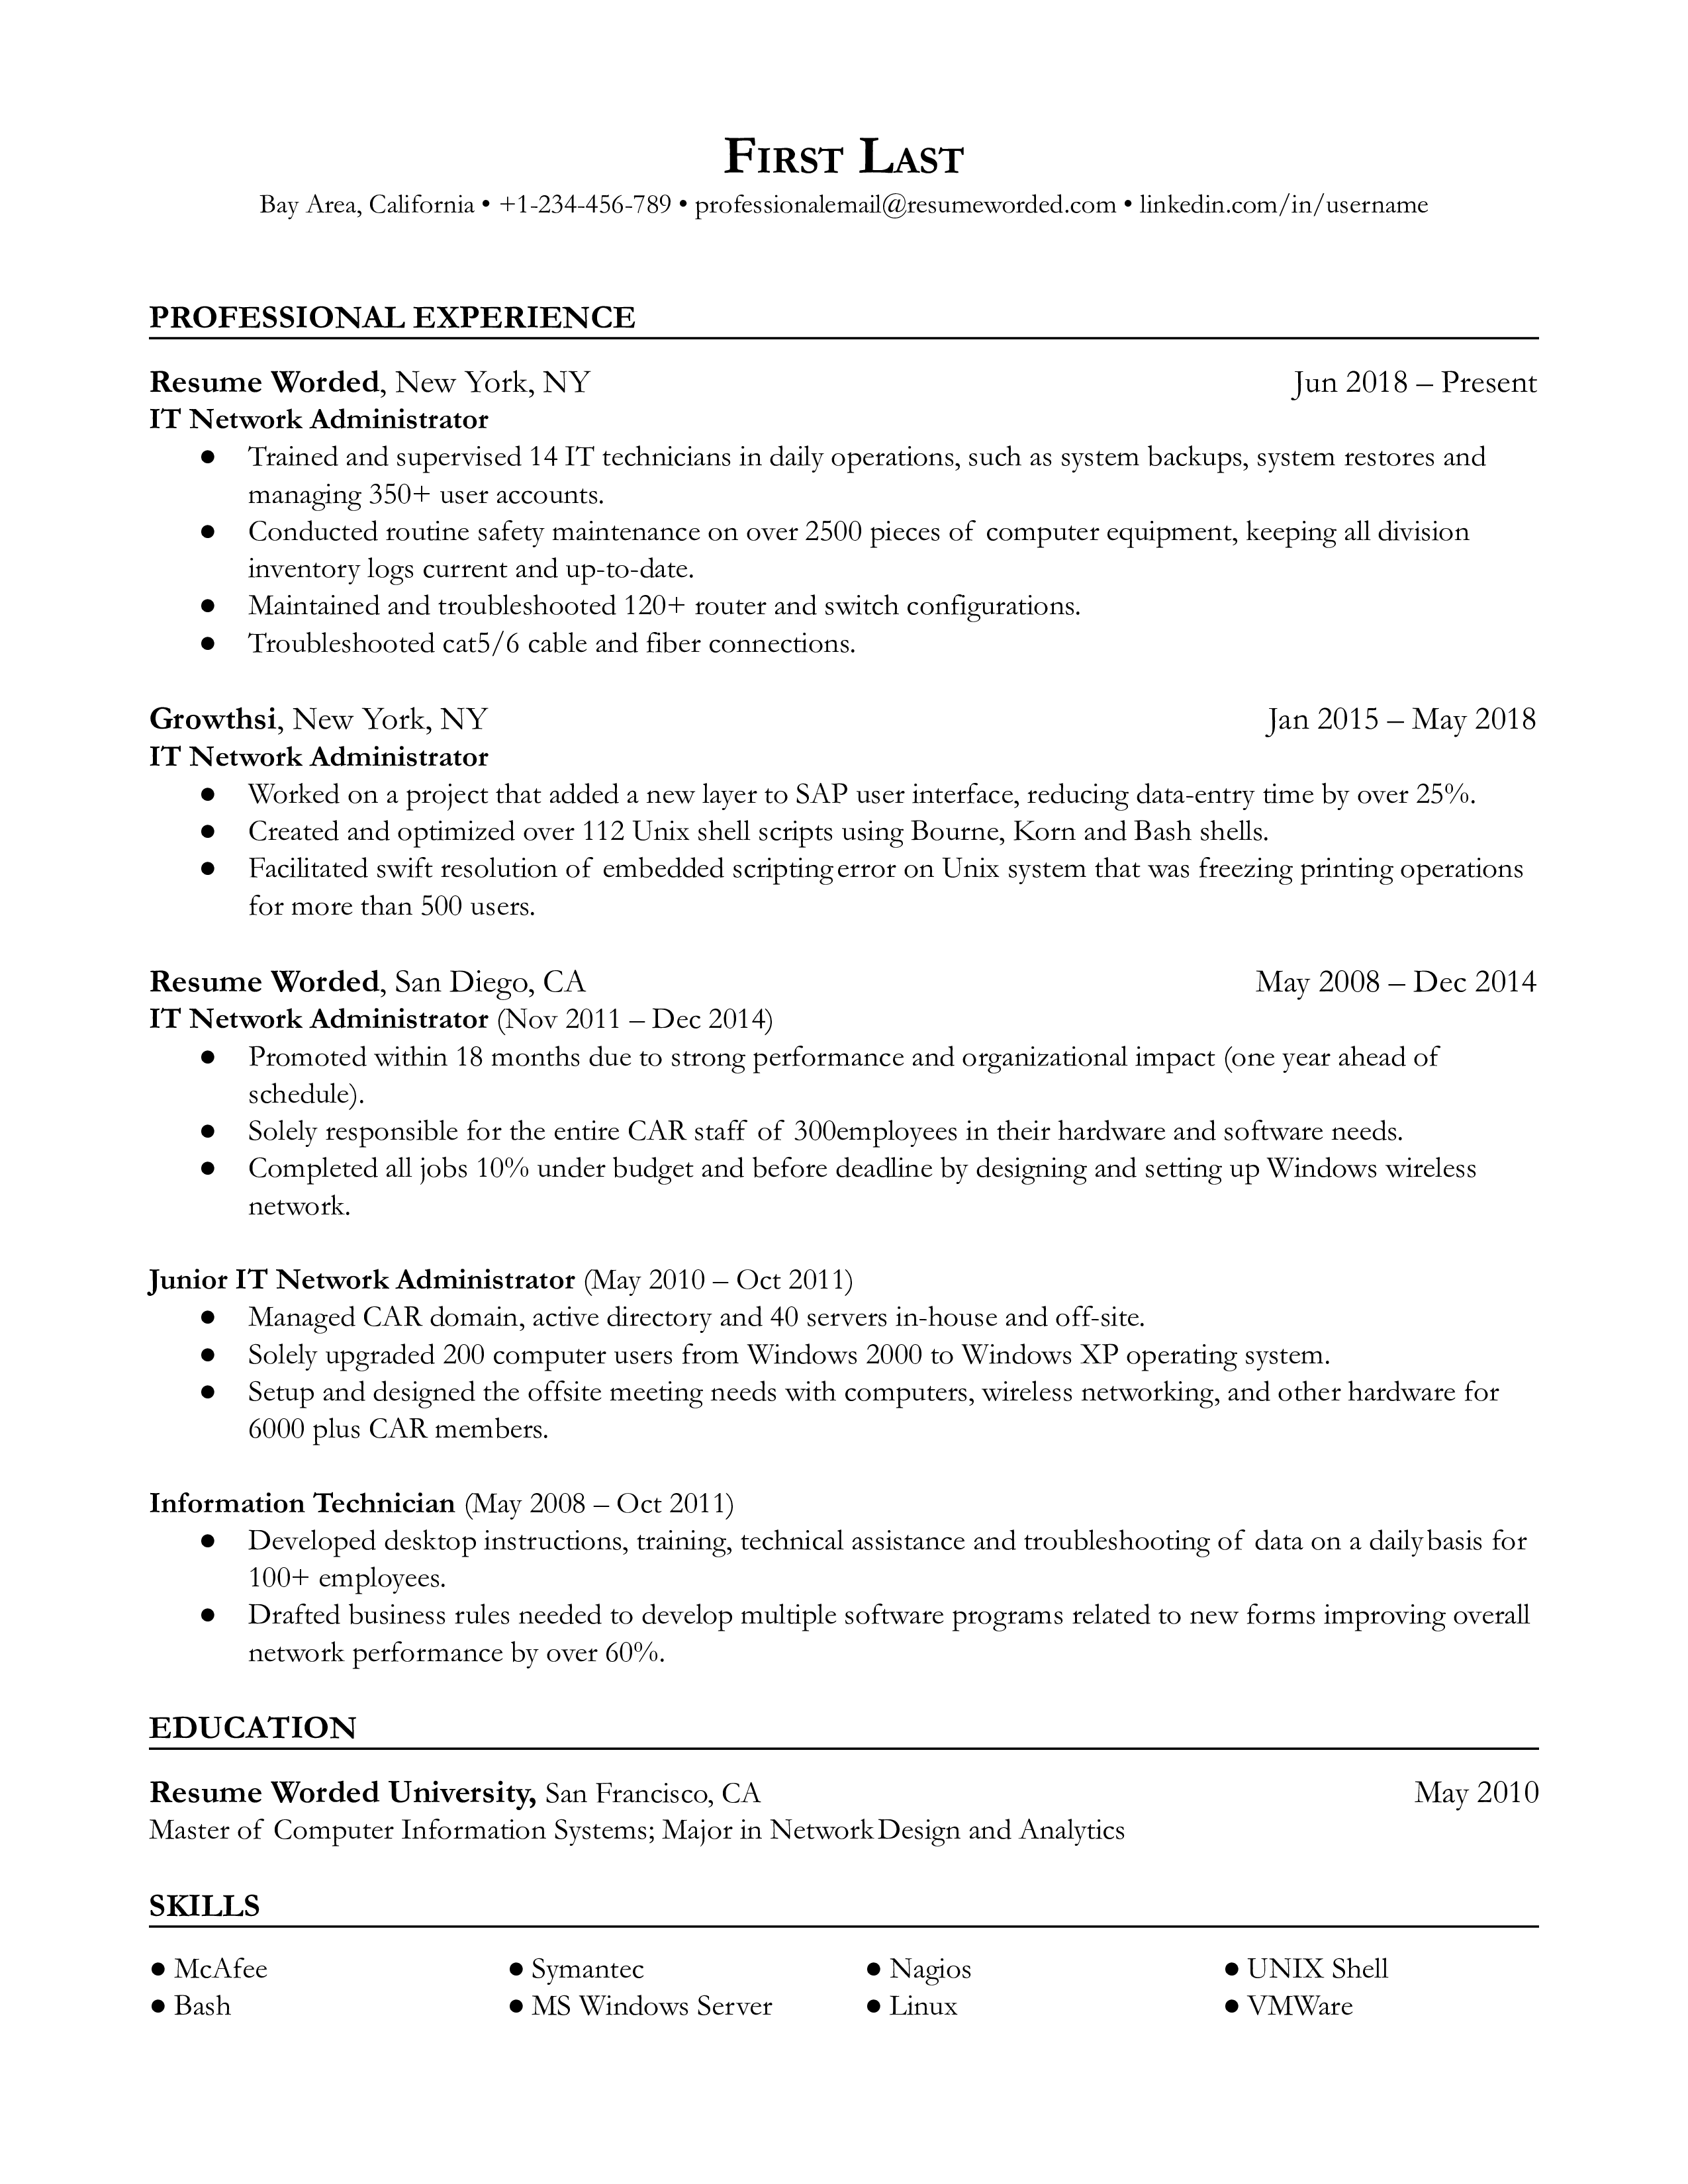 IT Network Administrator Resume Template + Example